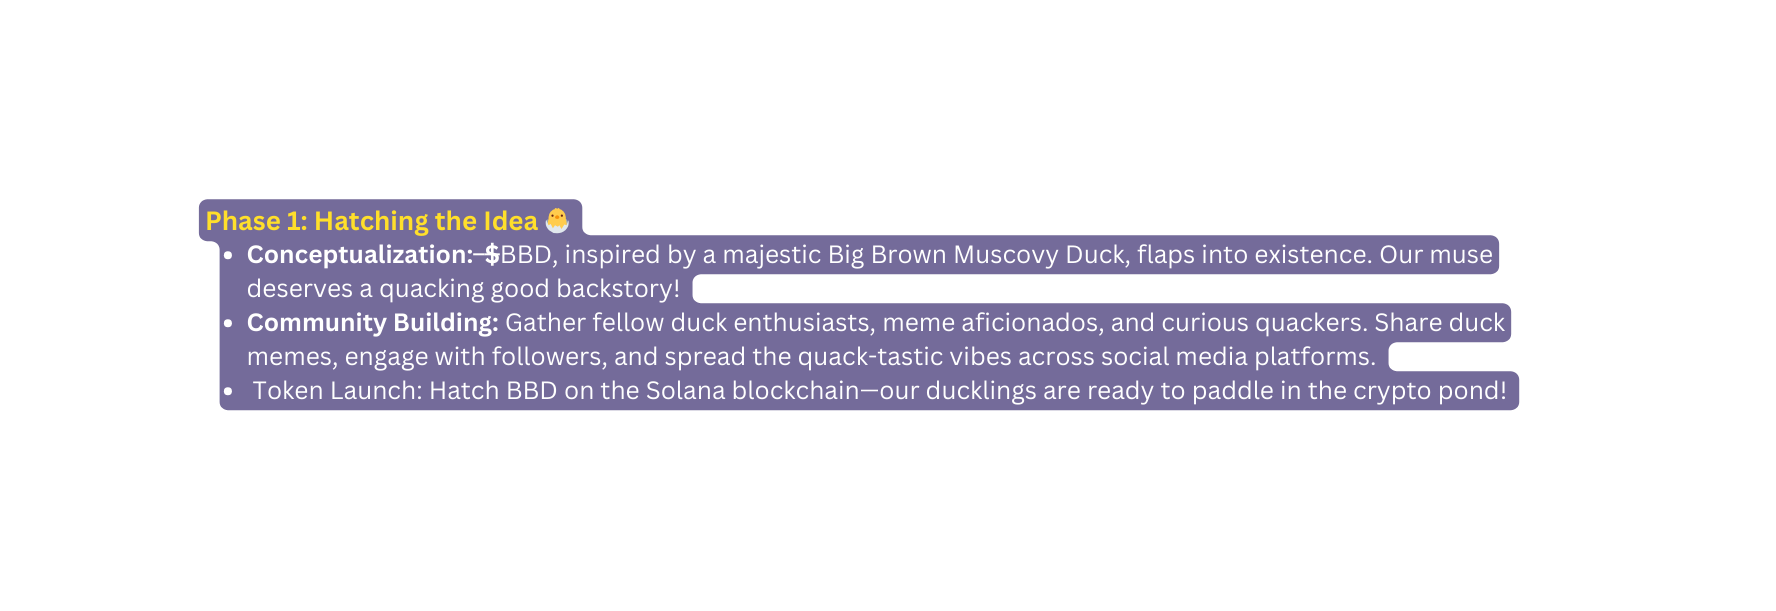 Phase 1 Hatching the Idea Conceptualization BBD inspired by a majestic Big Brown Muscovy Duck flaps into existence Our muse deserves a quacking good backstory Community Building Gather fellow duck enthusiasts meme aficionados and curious quackers Share duck memes engage with followers and spread the quack tastic vibes across social media platforms Token Launch Hatch BBD on the Solana blockchain our ducklings are ready to paddle in the crypto pond